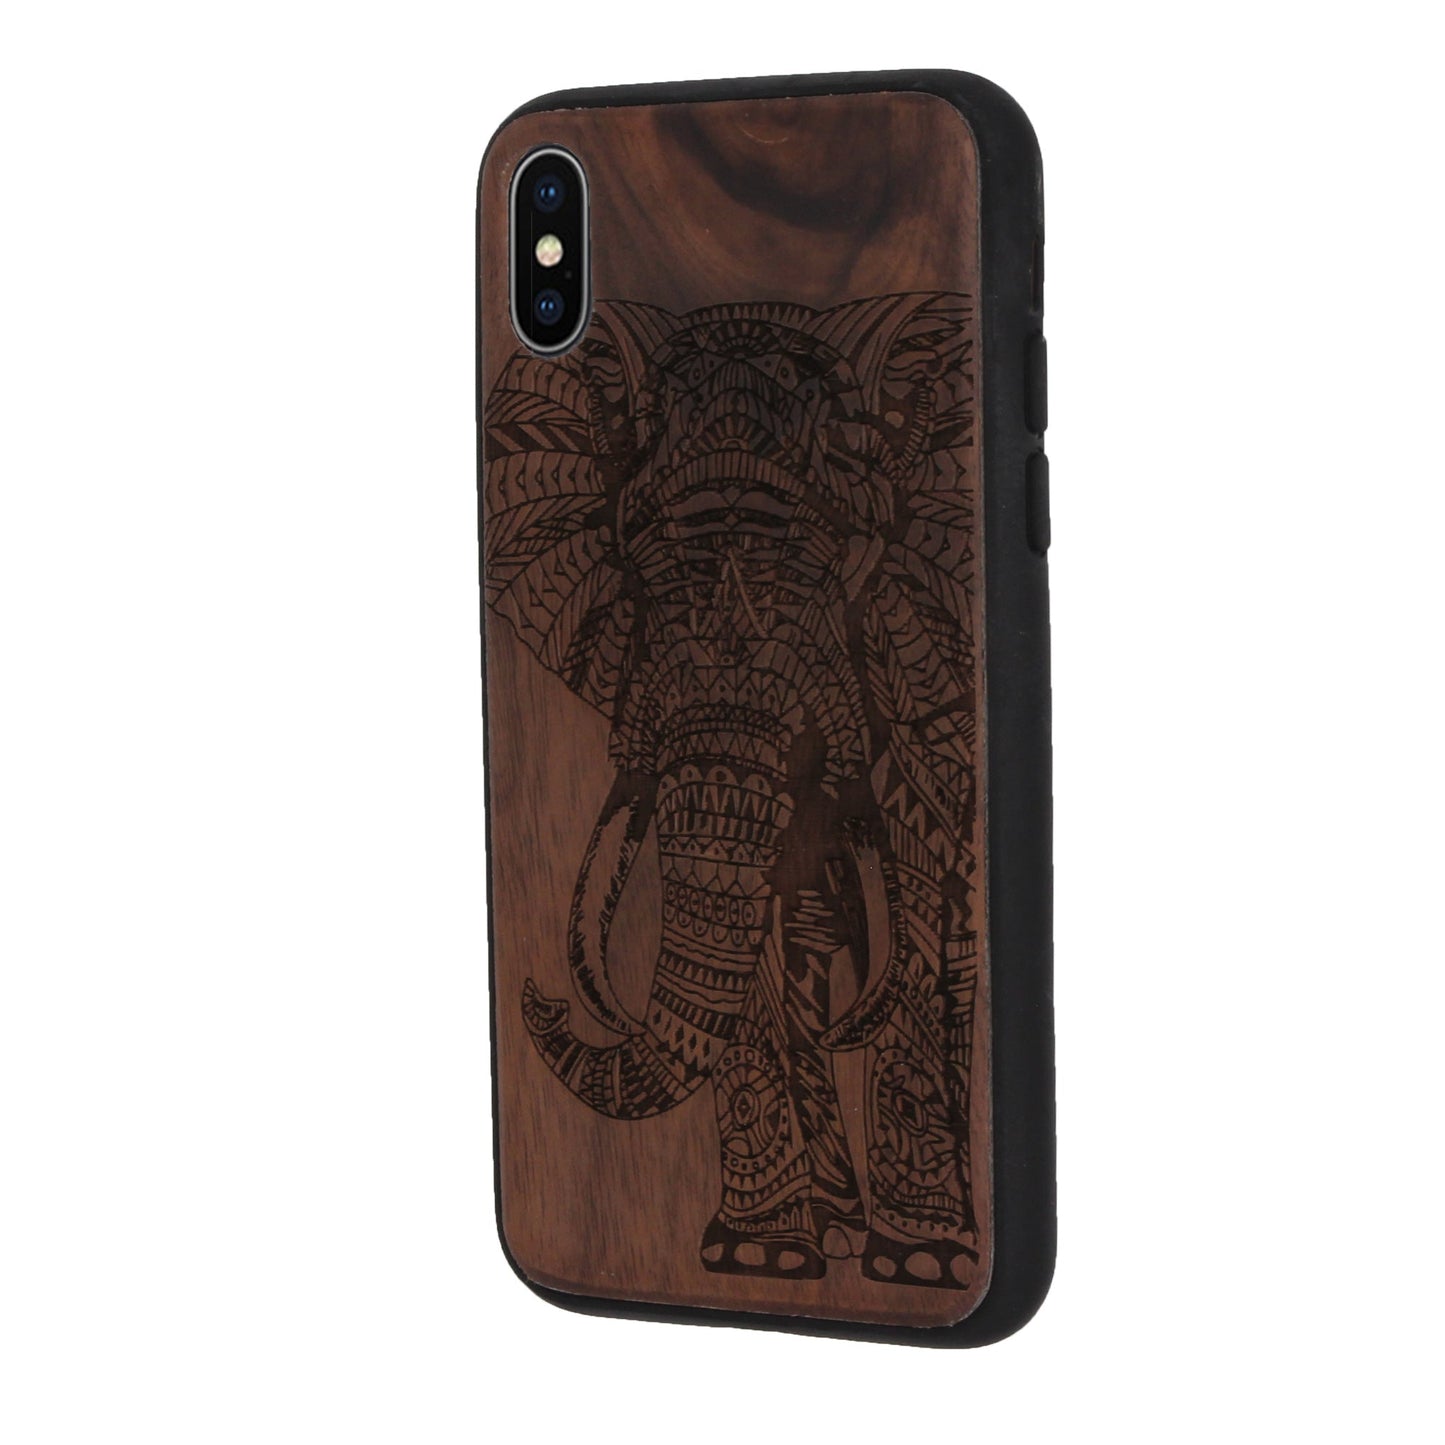 Elephant Eden case made of walnut wood for iPhone XS Max